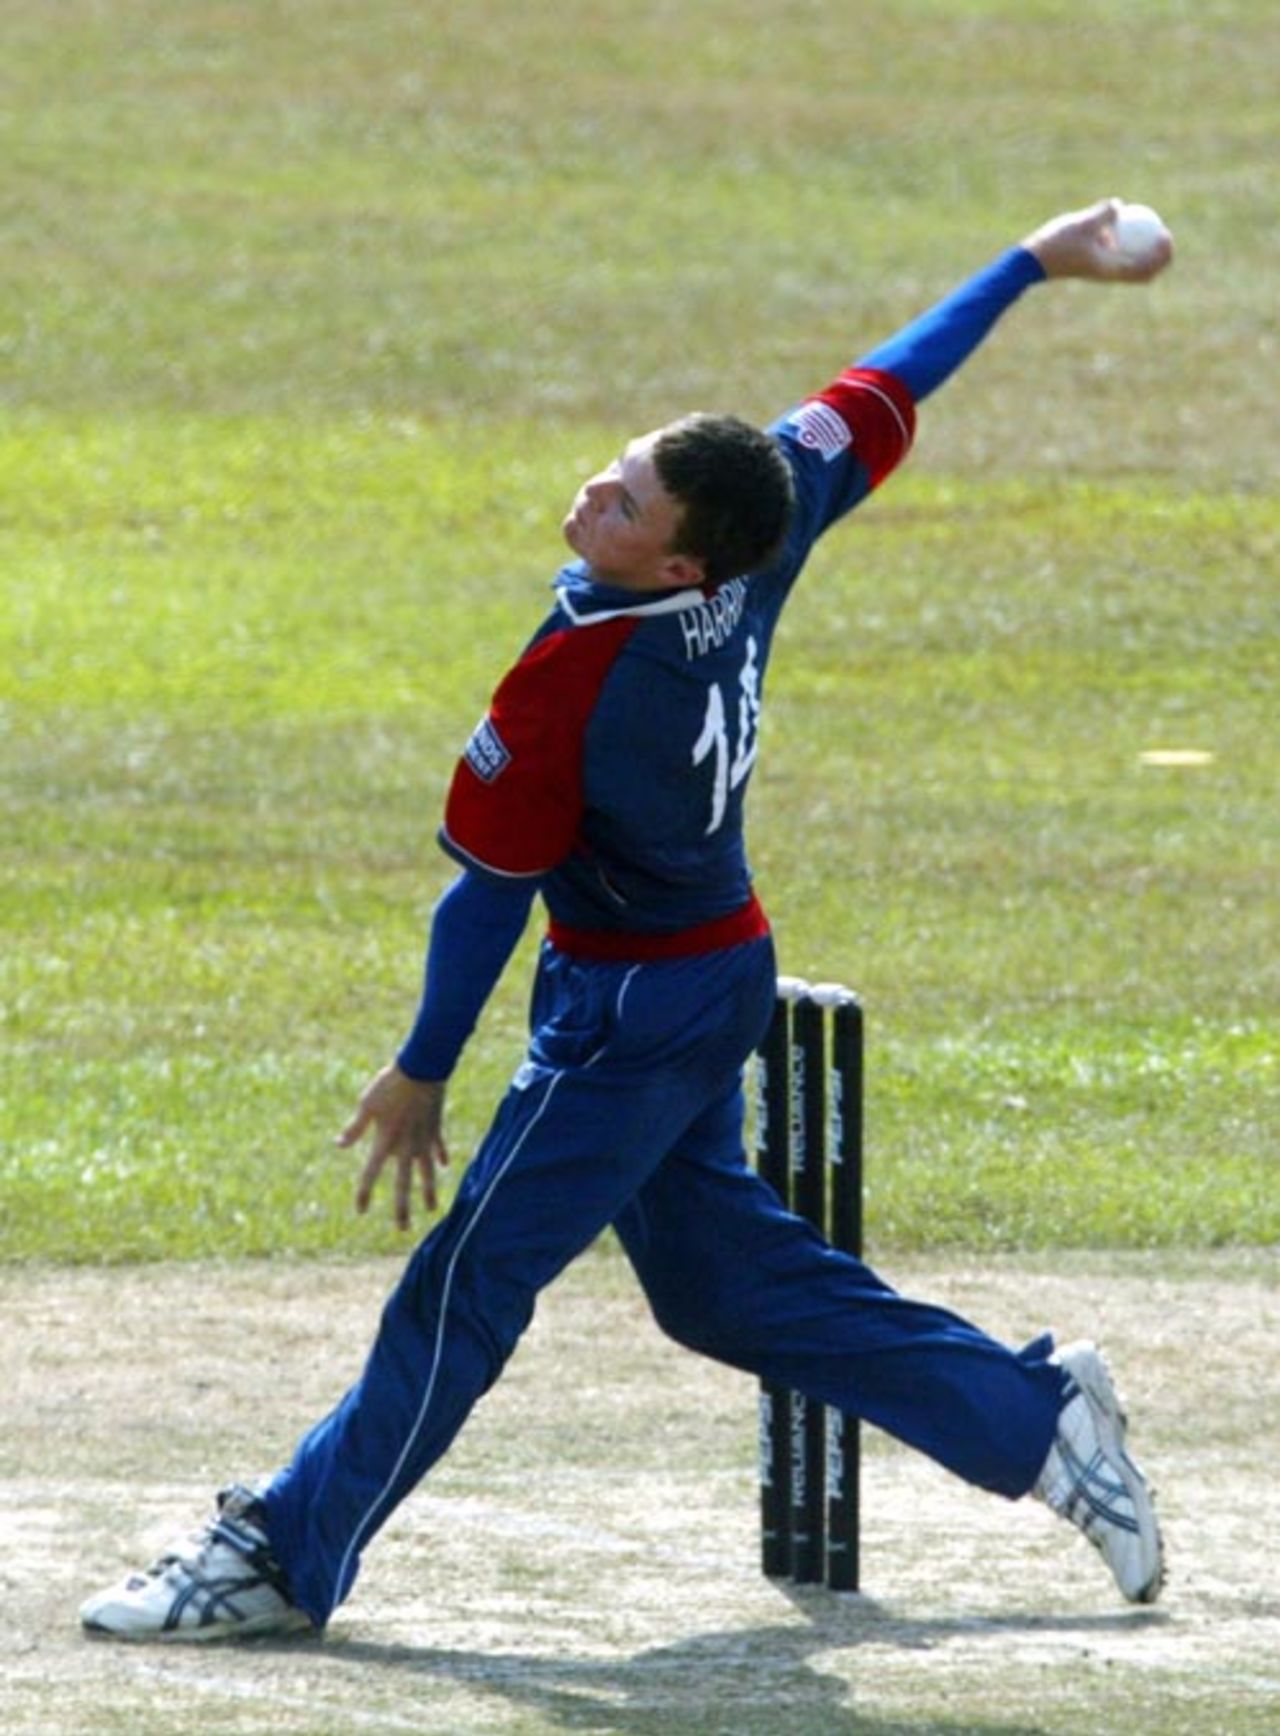 James Harris, who took 5 for 29, seen in his delivery stride, Bangladesh Under-19s v England Under-19s, Under-19 World Cup, Kuala Lumpur, February 22, 2008 